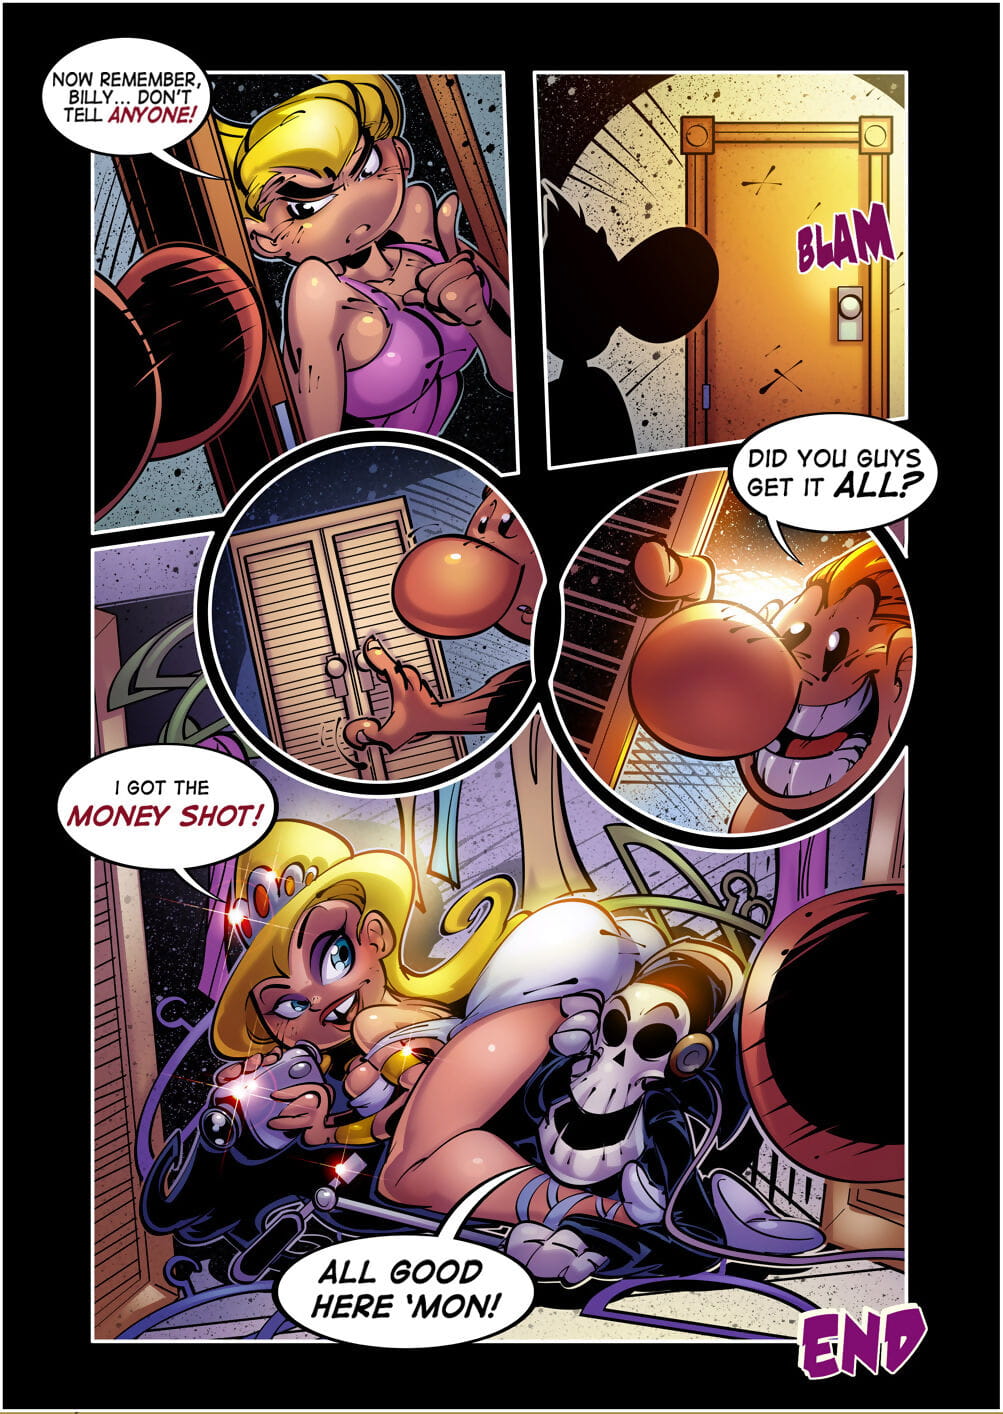 The Sexy Adventures of Billy & Mandy page 1